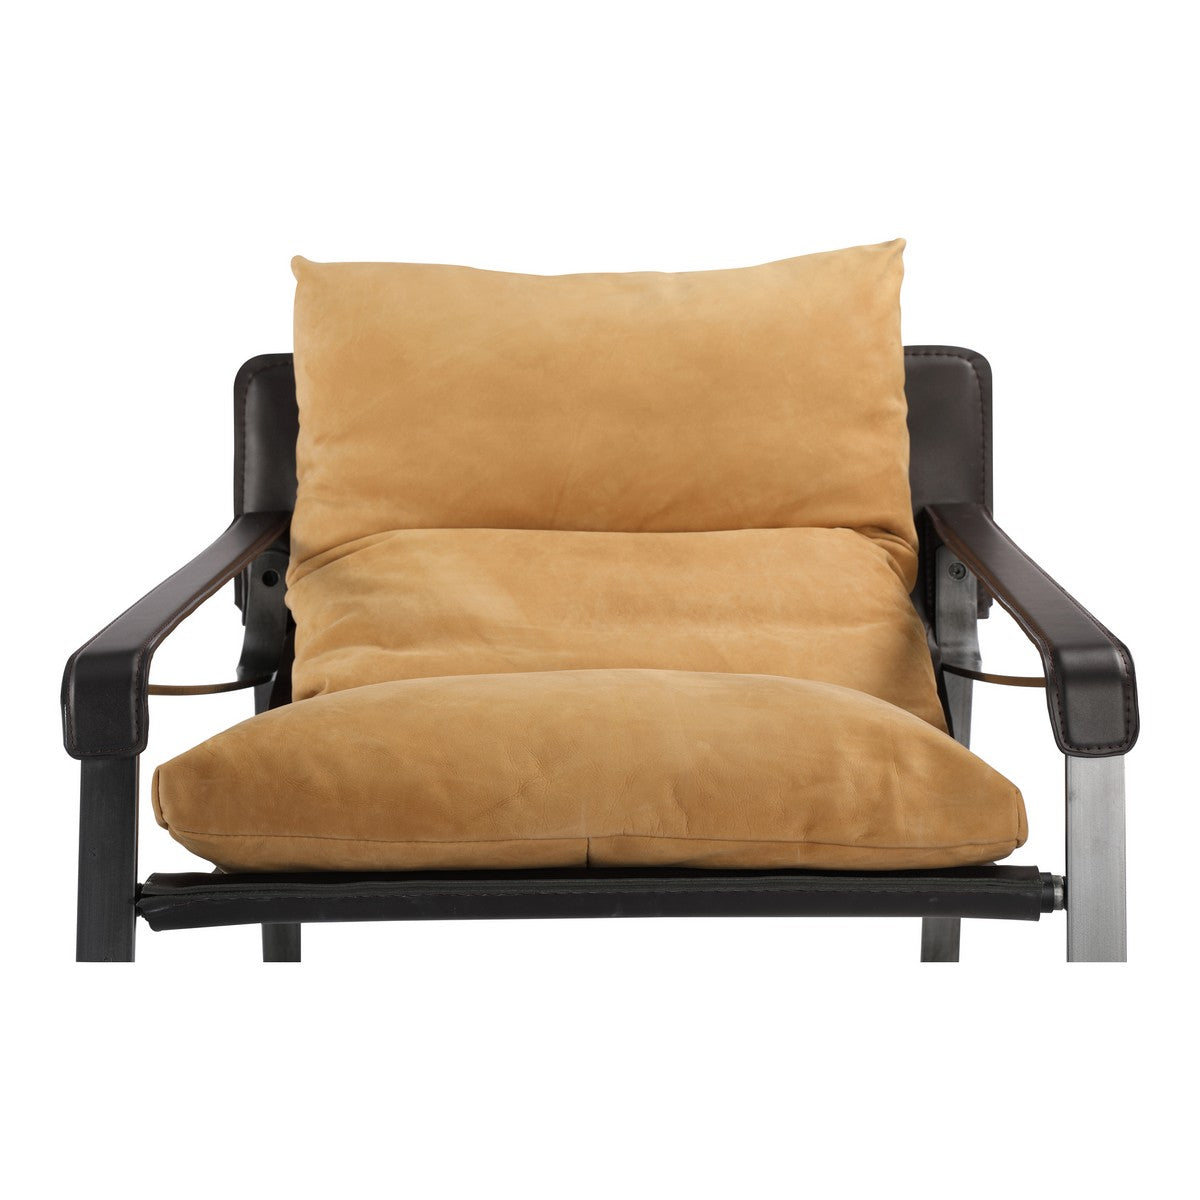 Moe's Home Collection Connor Club Chair Tan - PK-1044-40